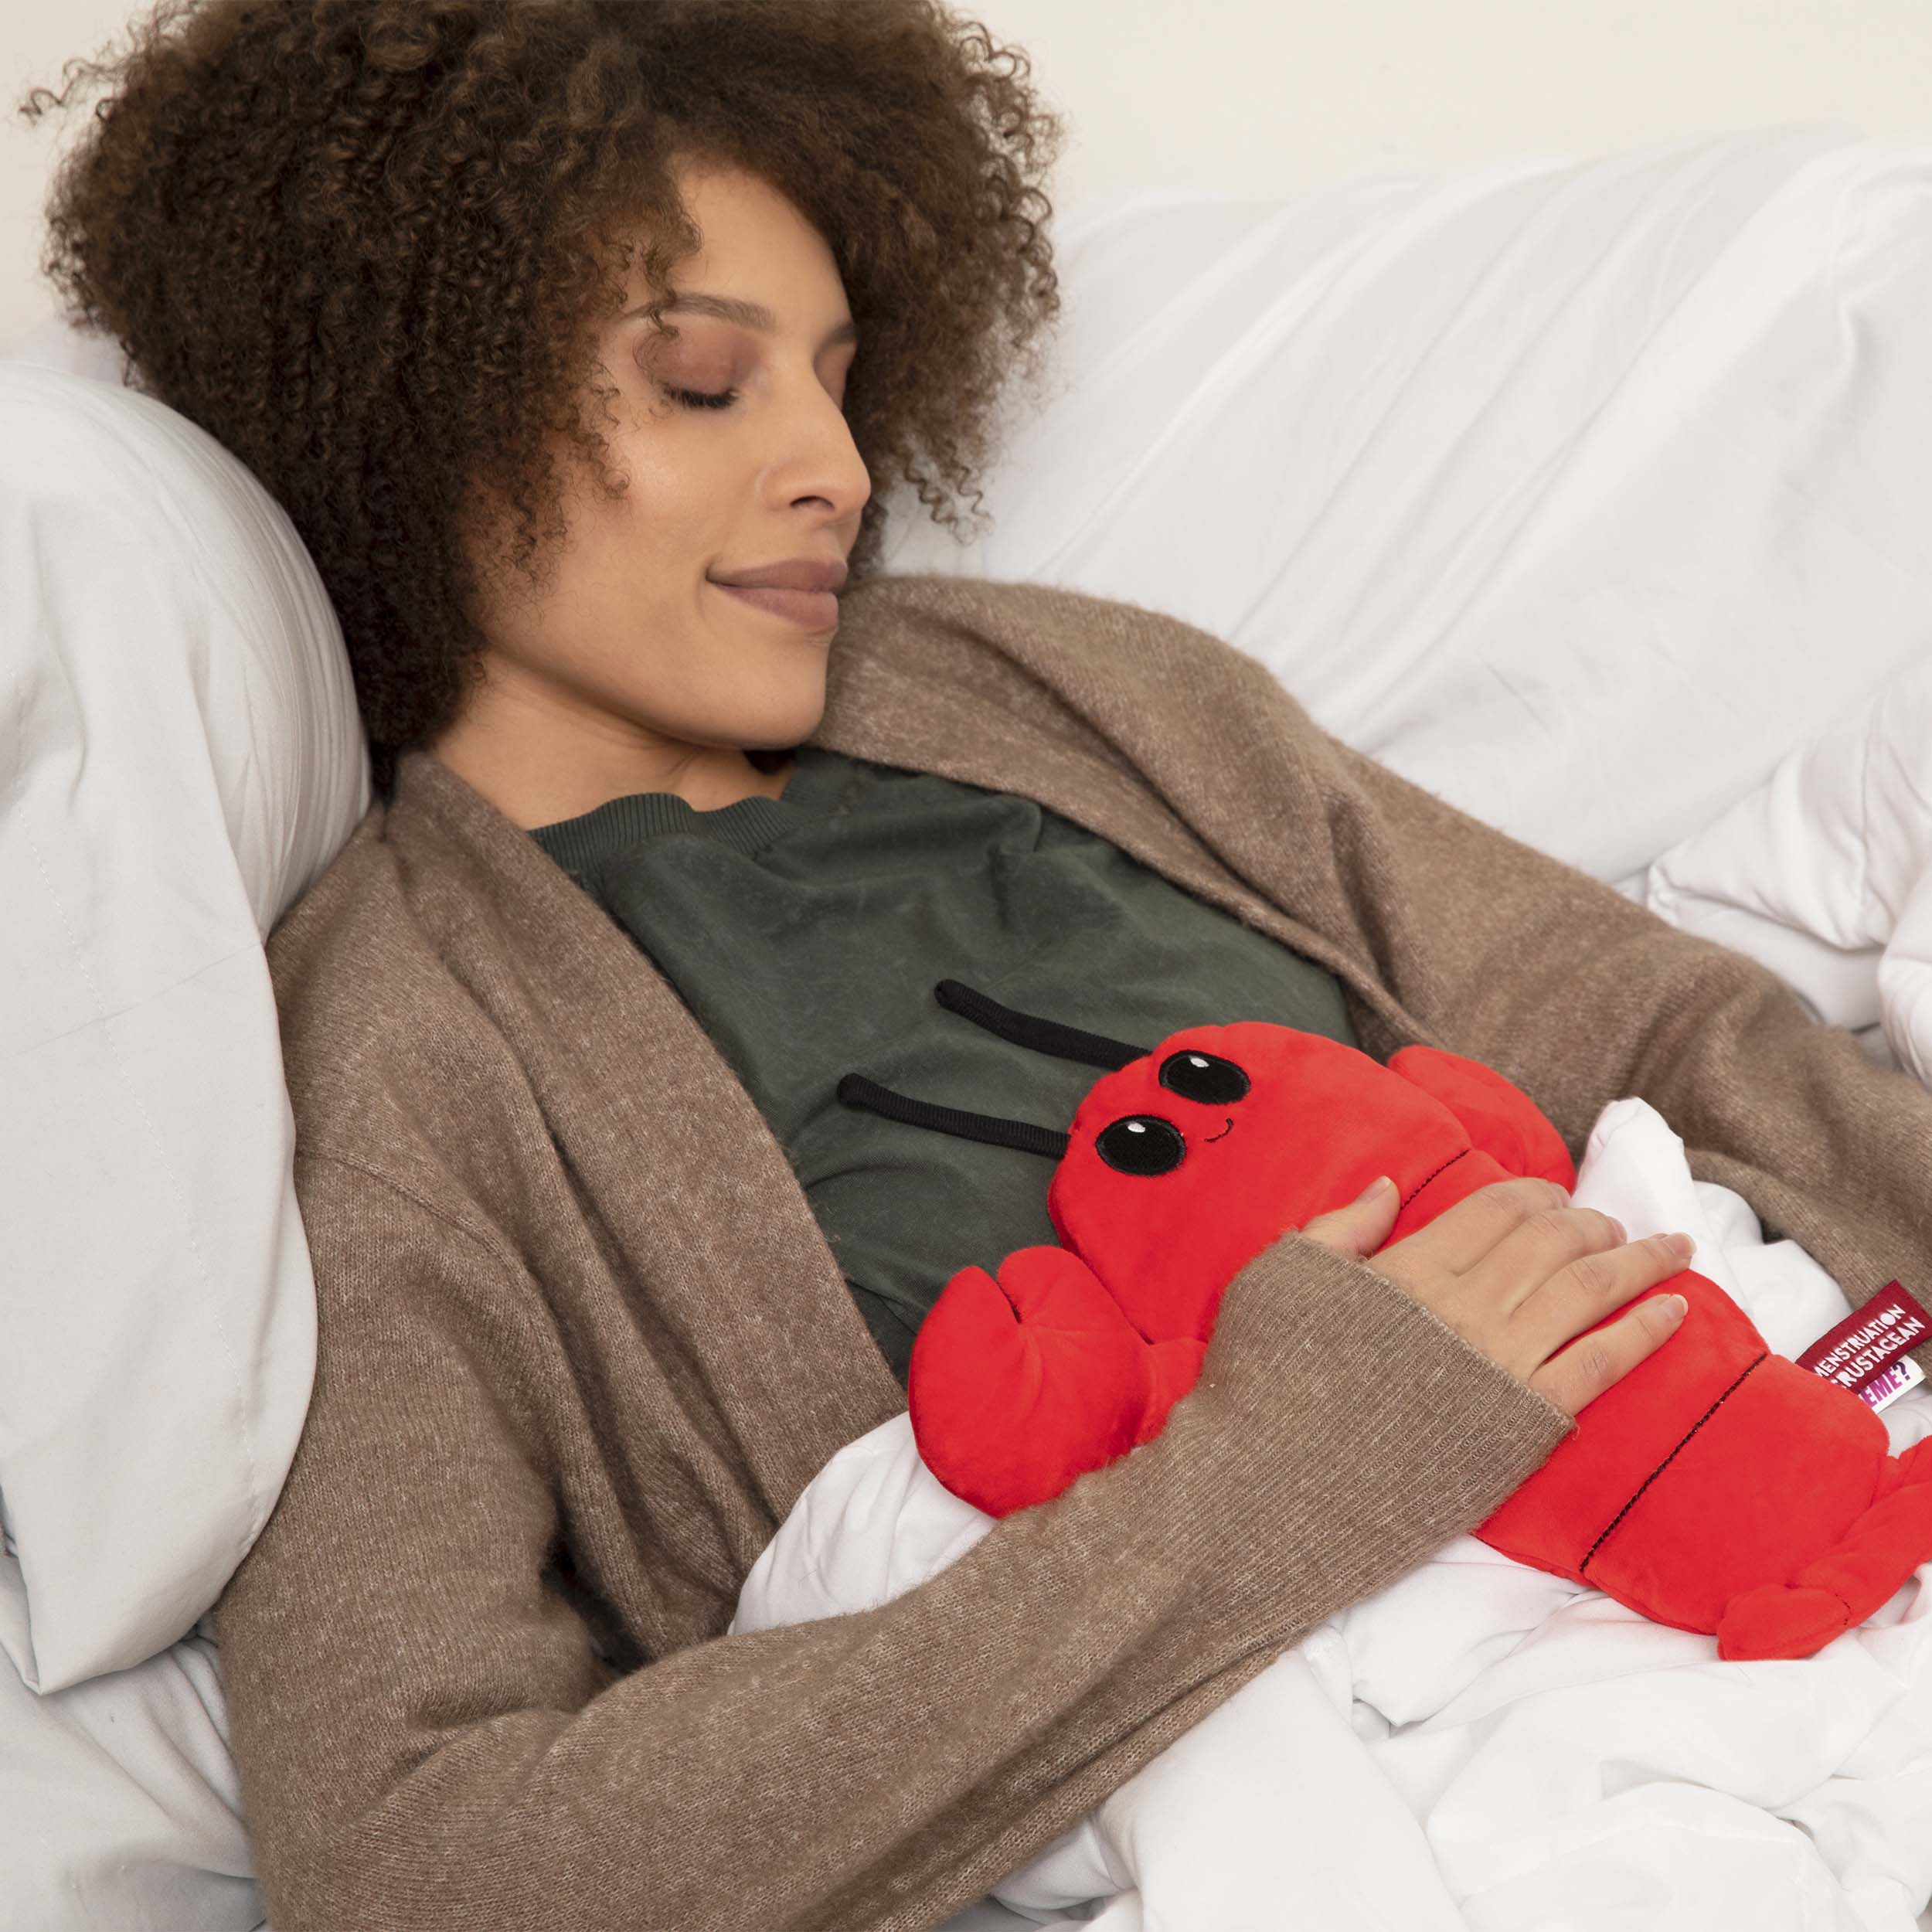 Menstruation Crustacean Lobster Heating Pad For Period Cramps & Muscle Pain